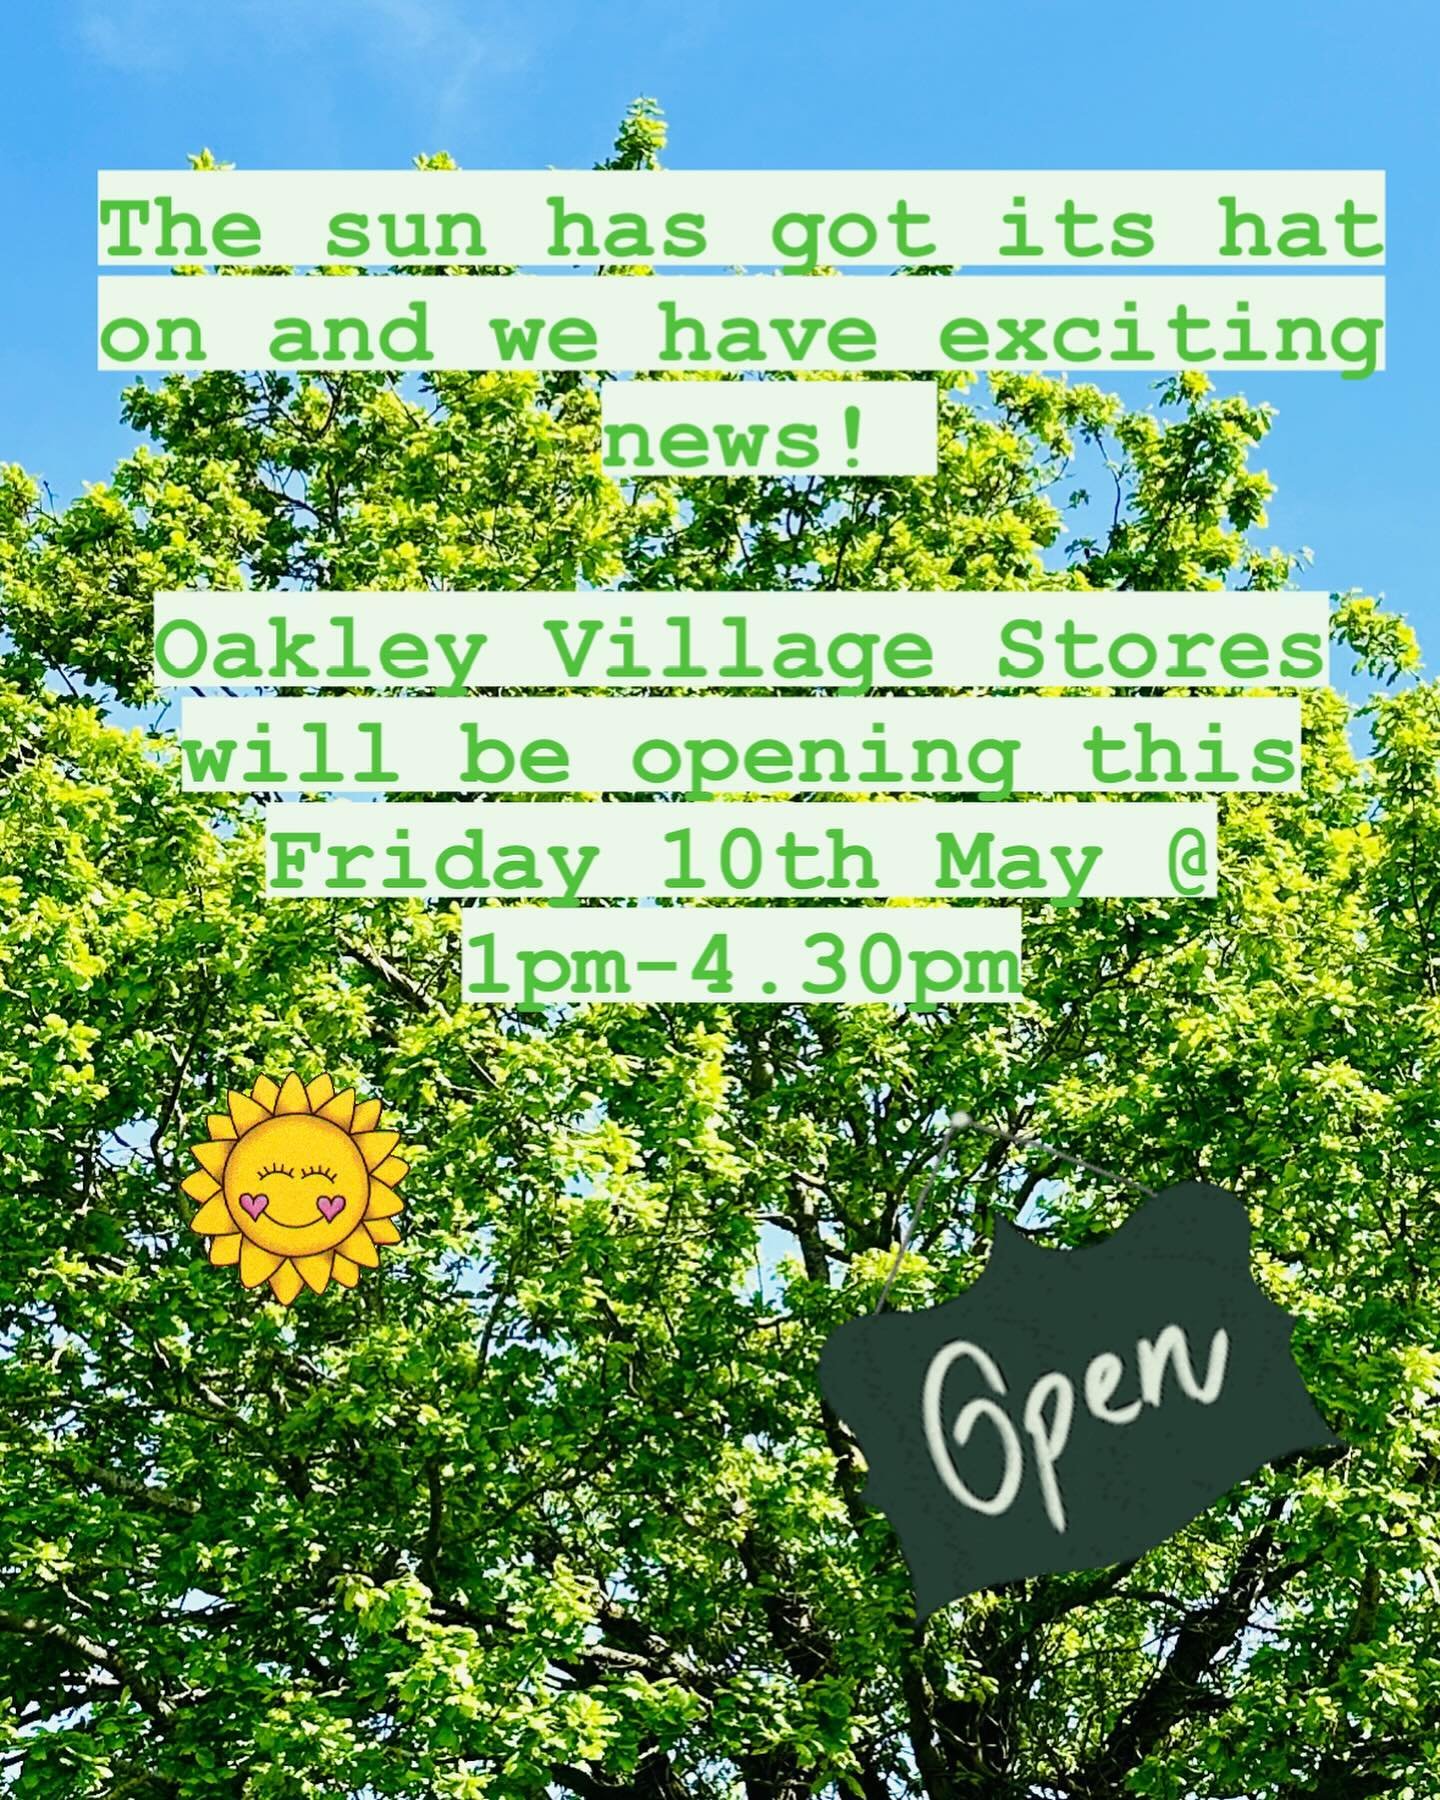 We are thrilled to announce that we will be opening our doors this Friday 10th May at 1pm.  Come and see us, browse our products and stock up ready for the sunny weekend ahead. We can&rsquo;t wait to welcome you!